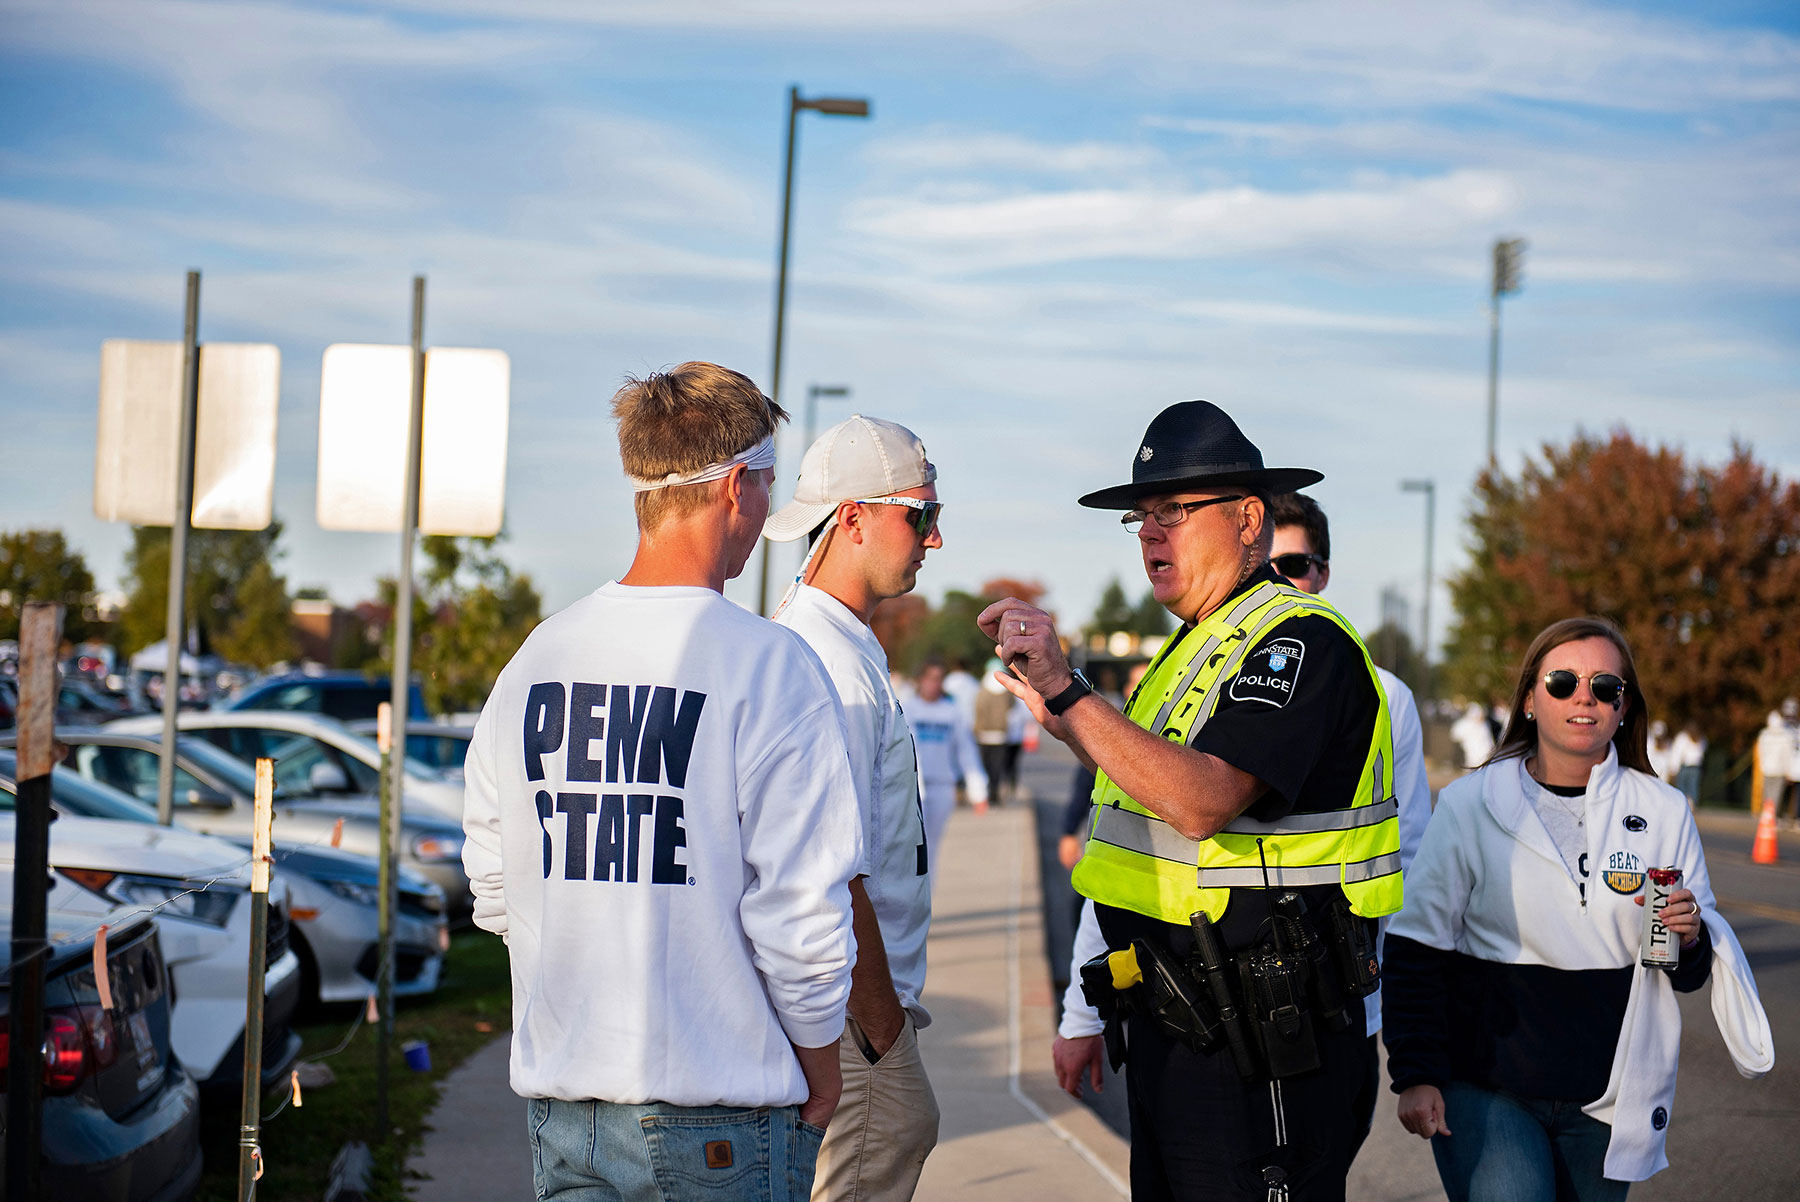 A police officer reprimanding two fans dressed in Penn State sweatshirts.